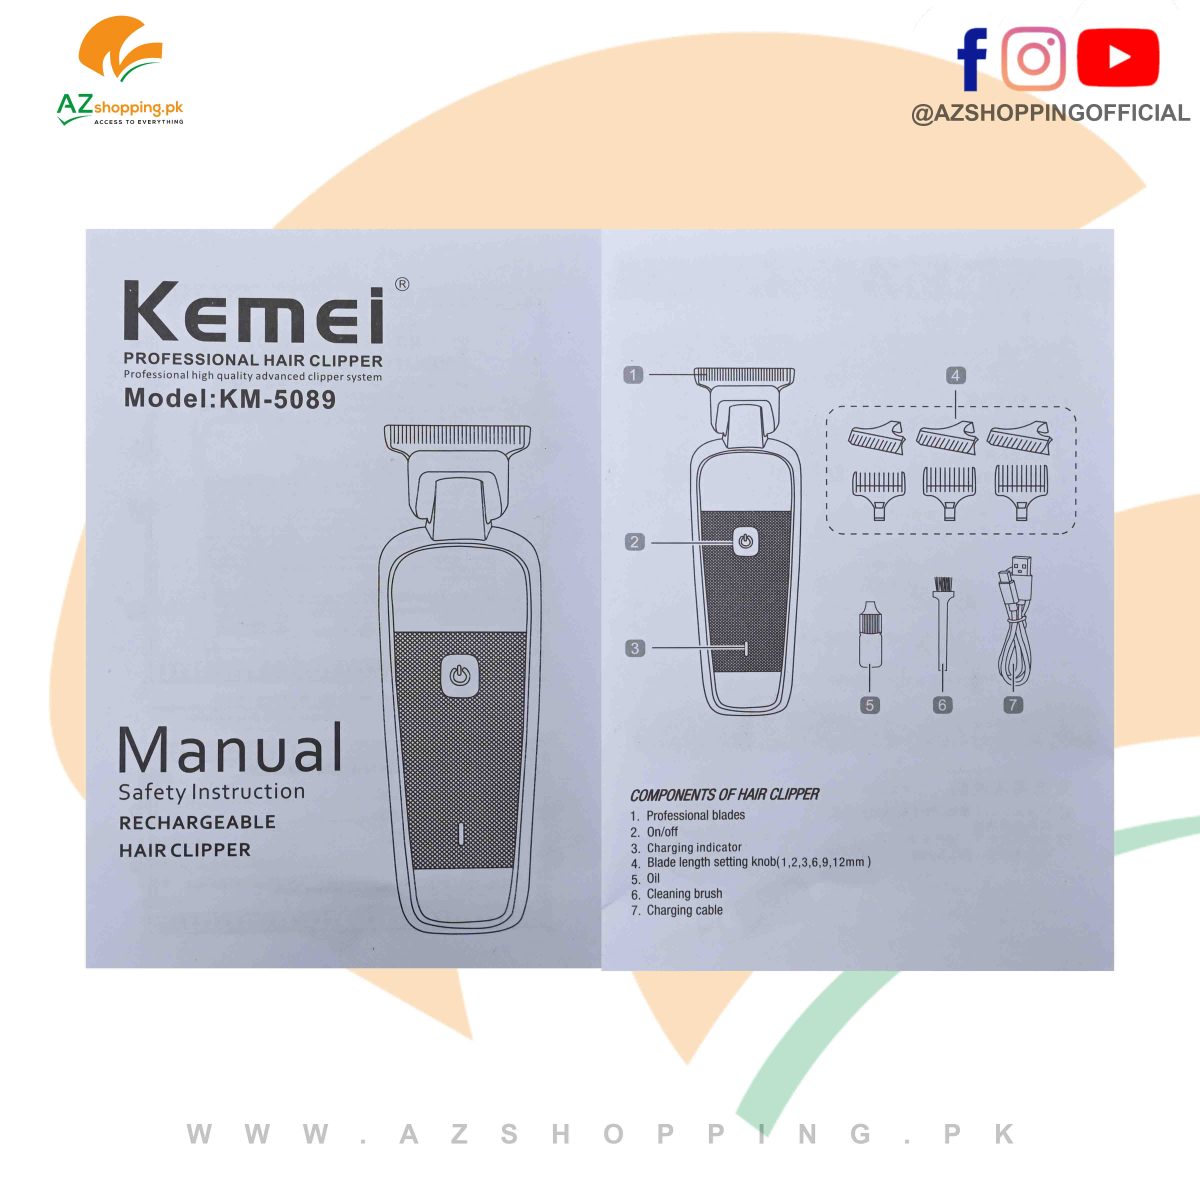 Kemei – Professional Electric Hair Clipper, Trimmer, Groomer & Shaver Machine with Carbon Steel Cutter, two Speed Adjustment, A1 Chip Prevent Hair From Being Stuck – Model: KM-5089